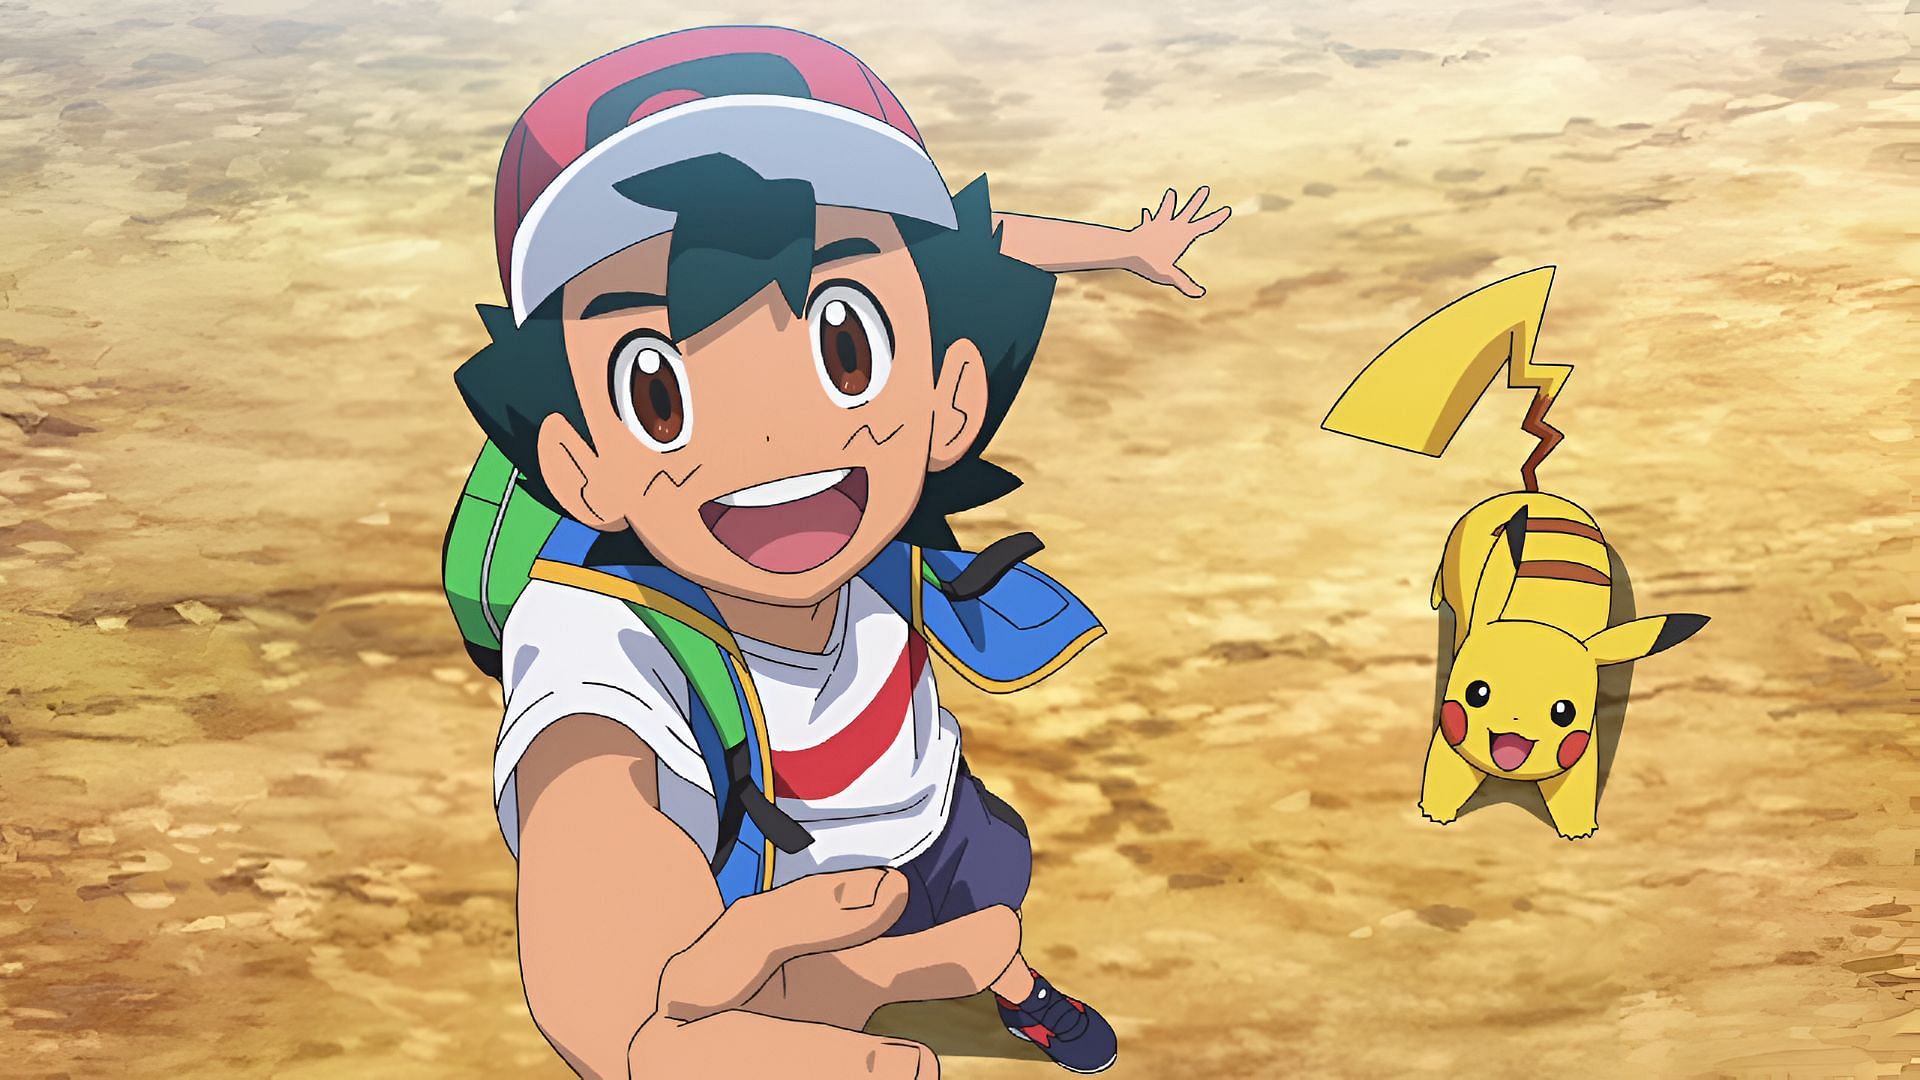 Ash and Pikachu depart on new adventures in the epilogue of Pokemon Journeys (Image via The Pokemon Company)